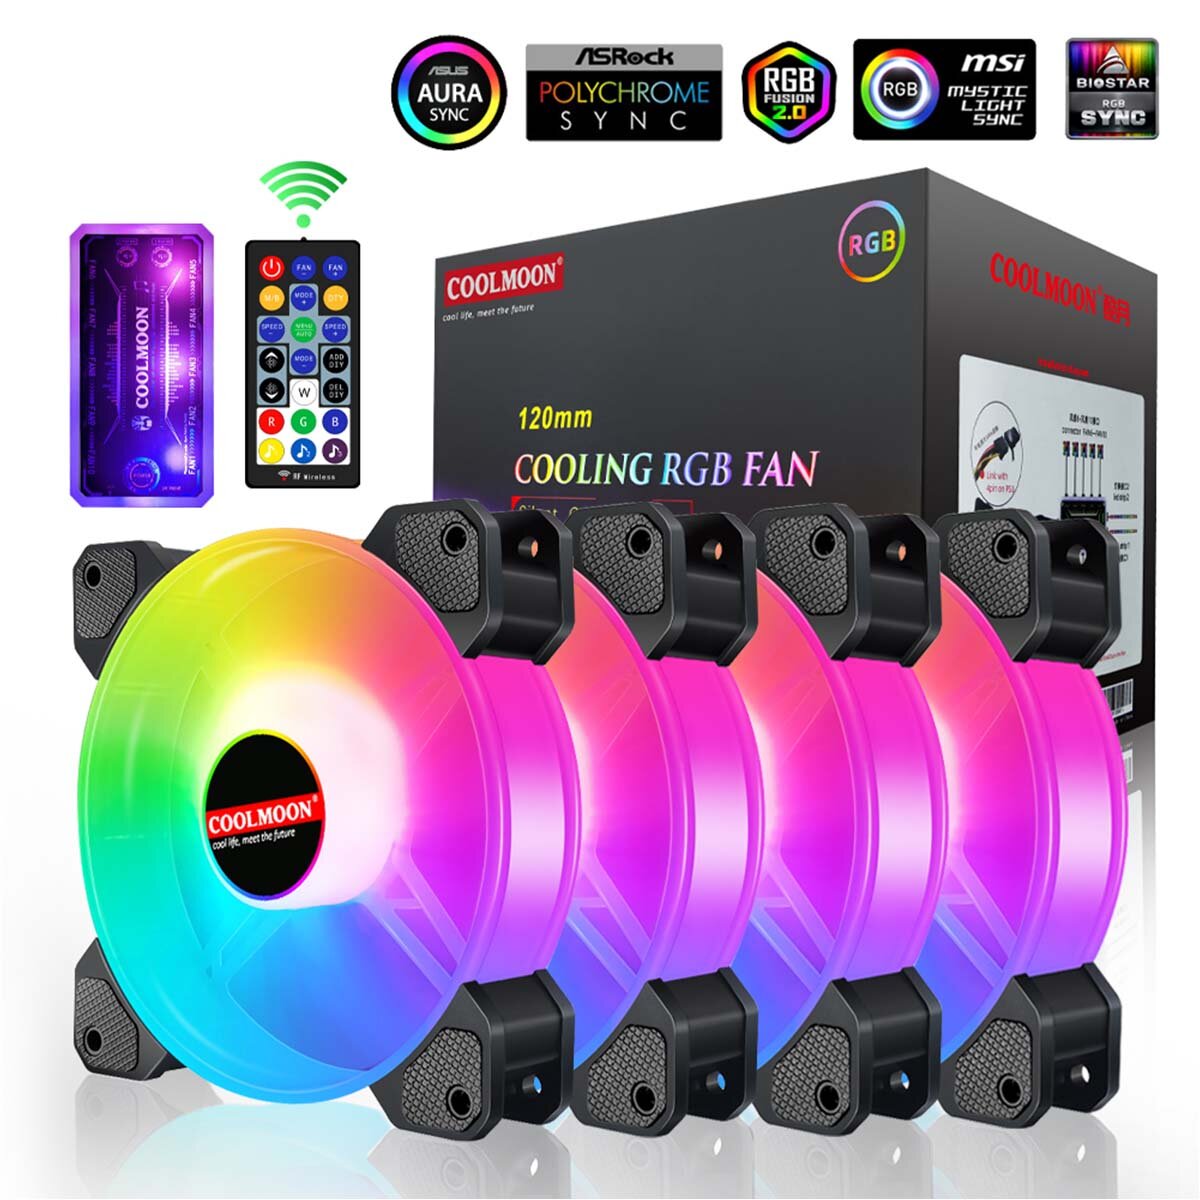 COOLMOON 120mm Cooling Fan RGB 6PIN Computer Case Colorful Radiator Cooler PC 5V DC